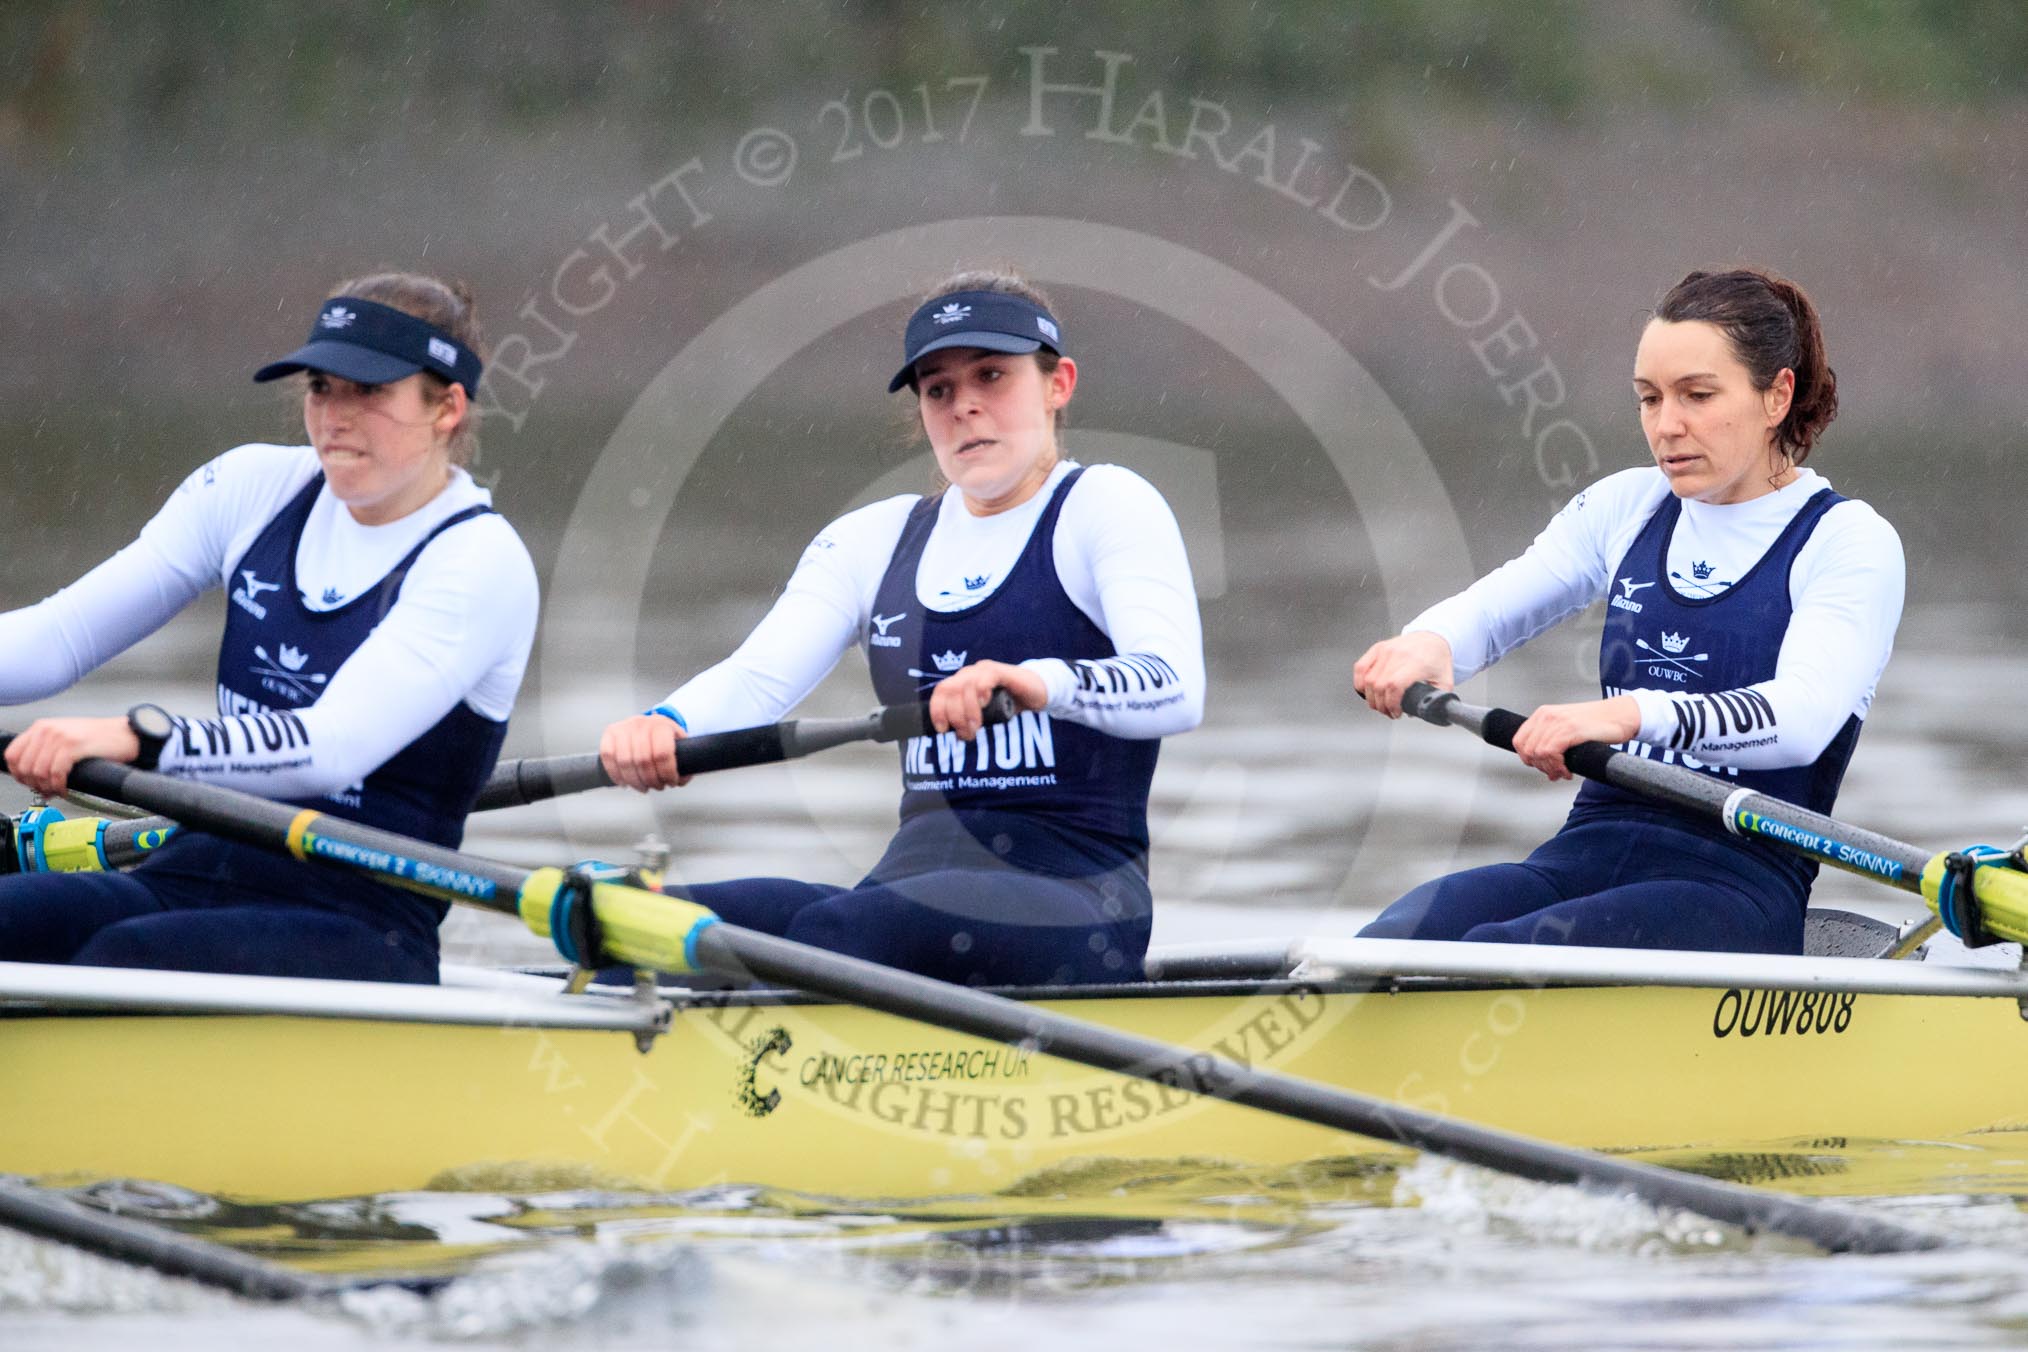 The Boat Race season 2018 - Women's Boat Race Trial Eights (OUWBC, Oxford): "Coursing River" -  3 Stefanie Zekoll, 2 Rachel Anderson, bow Sarah Payne-Riches.
River Thames between Putney Bridge and Mortlake,
London SW15,

United Kingdom,
on 21 January 2018 at 14:38, image #126